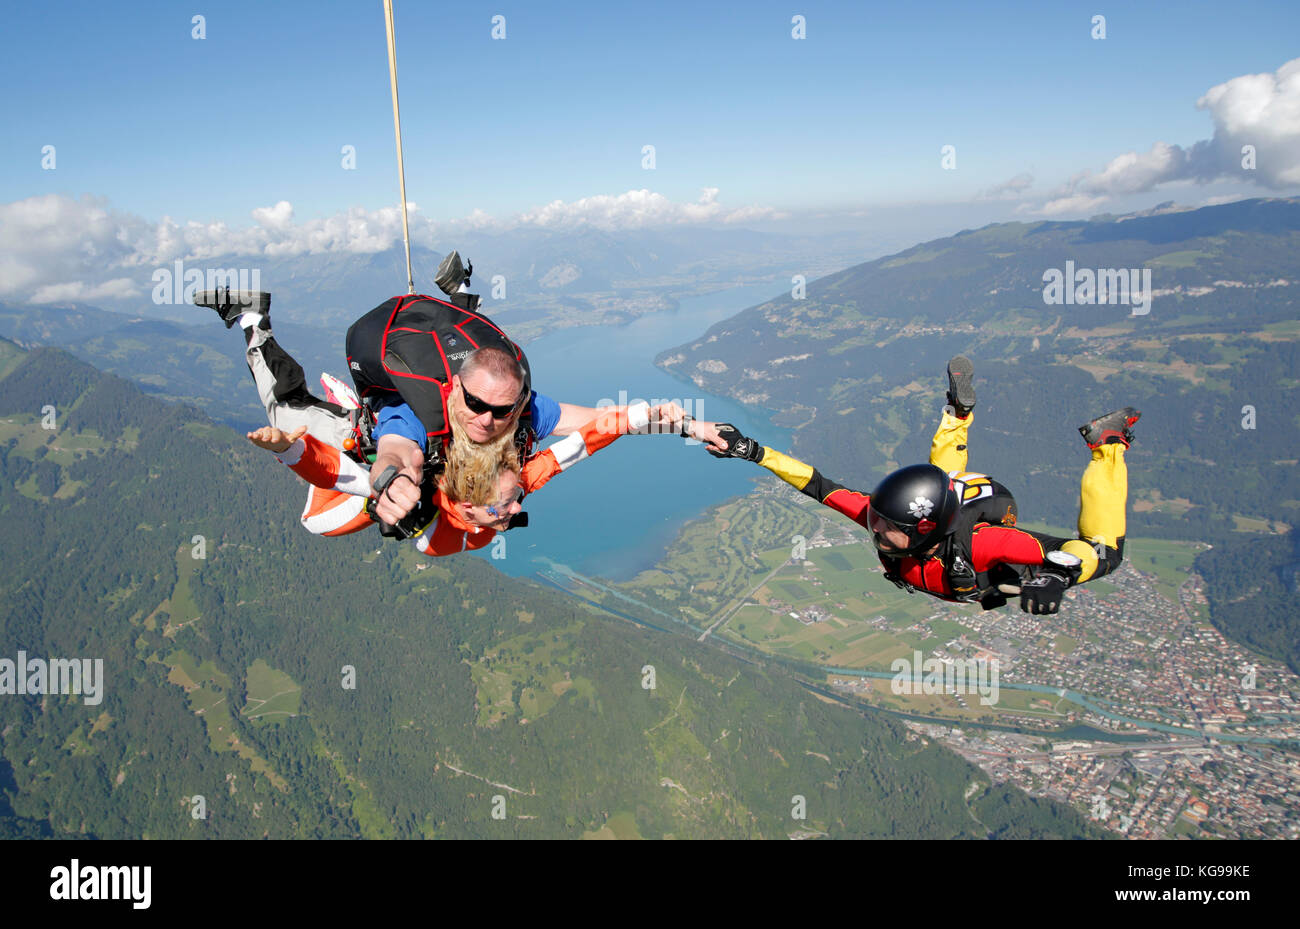 Tandem skydiving jump over a beautiful mountain area, together with a fun jumper holding hands. Can you see their smiley faces? Stock Photo